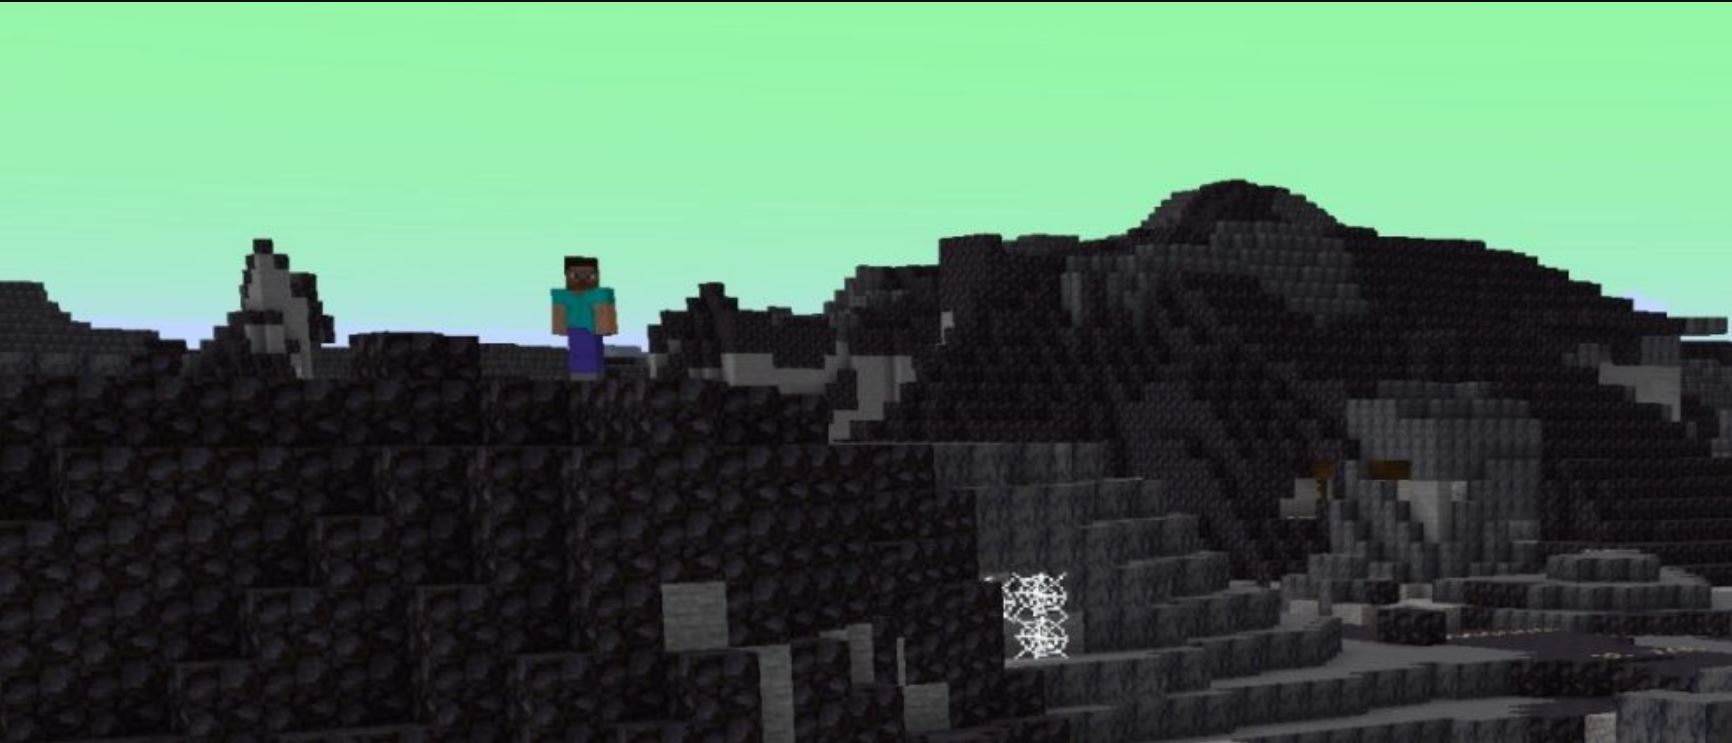 Minecraft Snapshot 20W28A: A Snapshot That Brings The Ability To Create Custom Biomes!